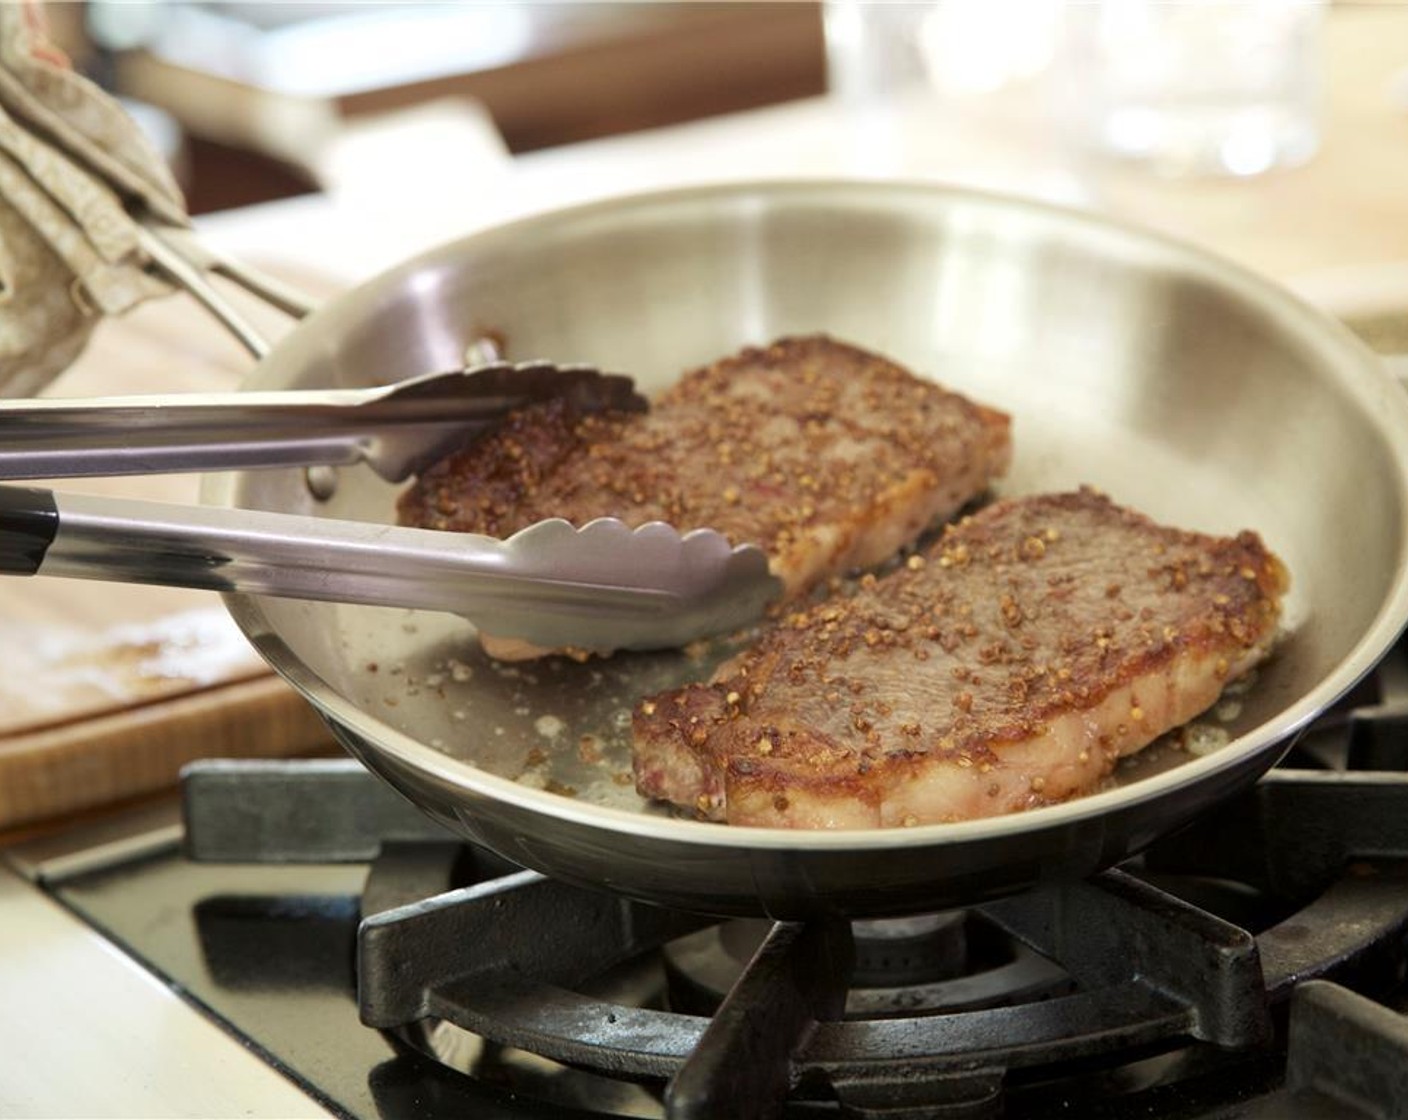 step 8 Heat a medium saute pan over high heat. Add a pat of Butter (to taste) and 1 tablespoon olive oil. When hot, add the steaks and sear for 2 minutes. Turn over and sear for 2 minutes more. Let rest until plating.